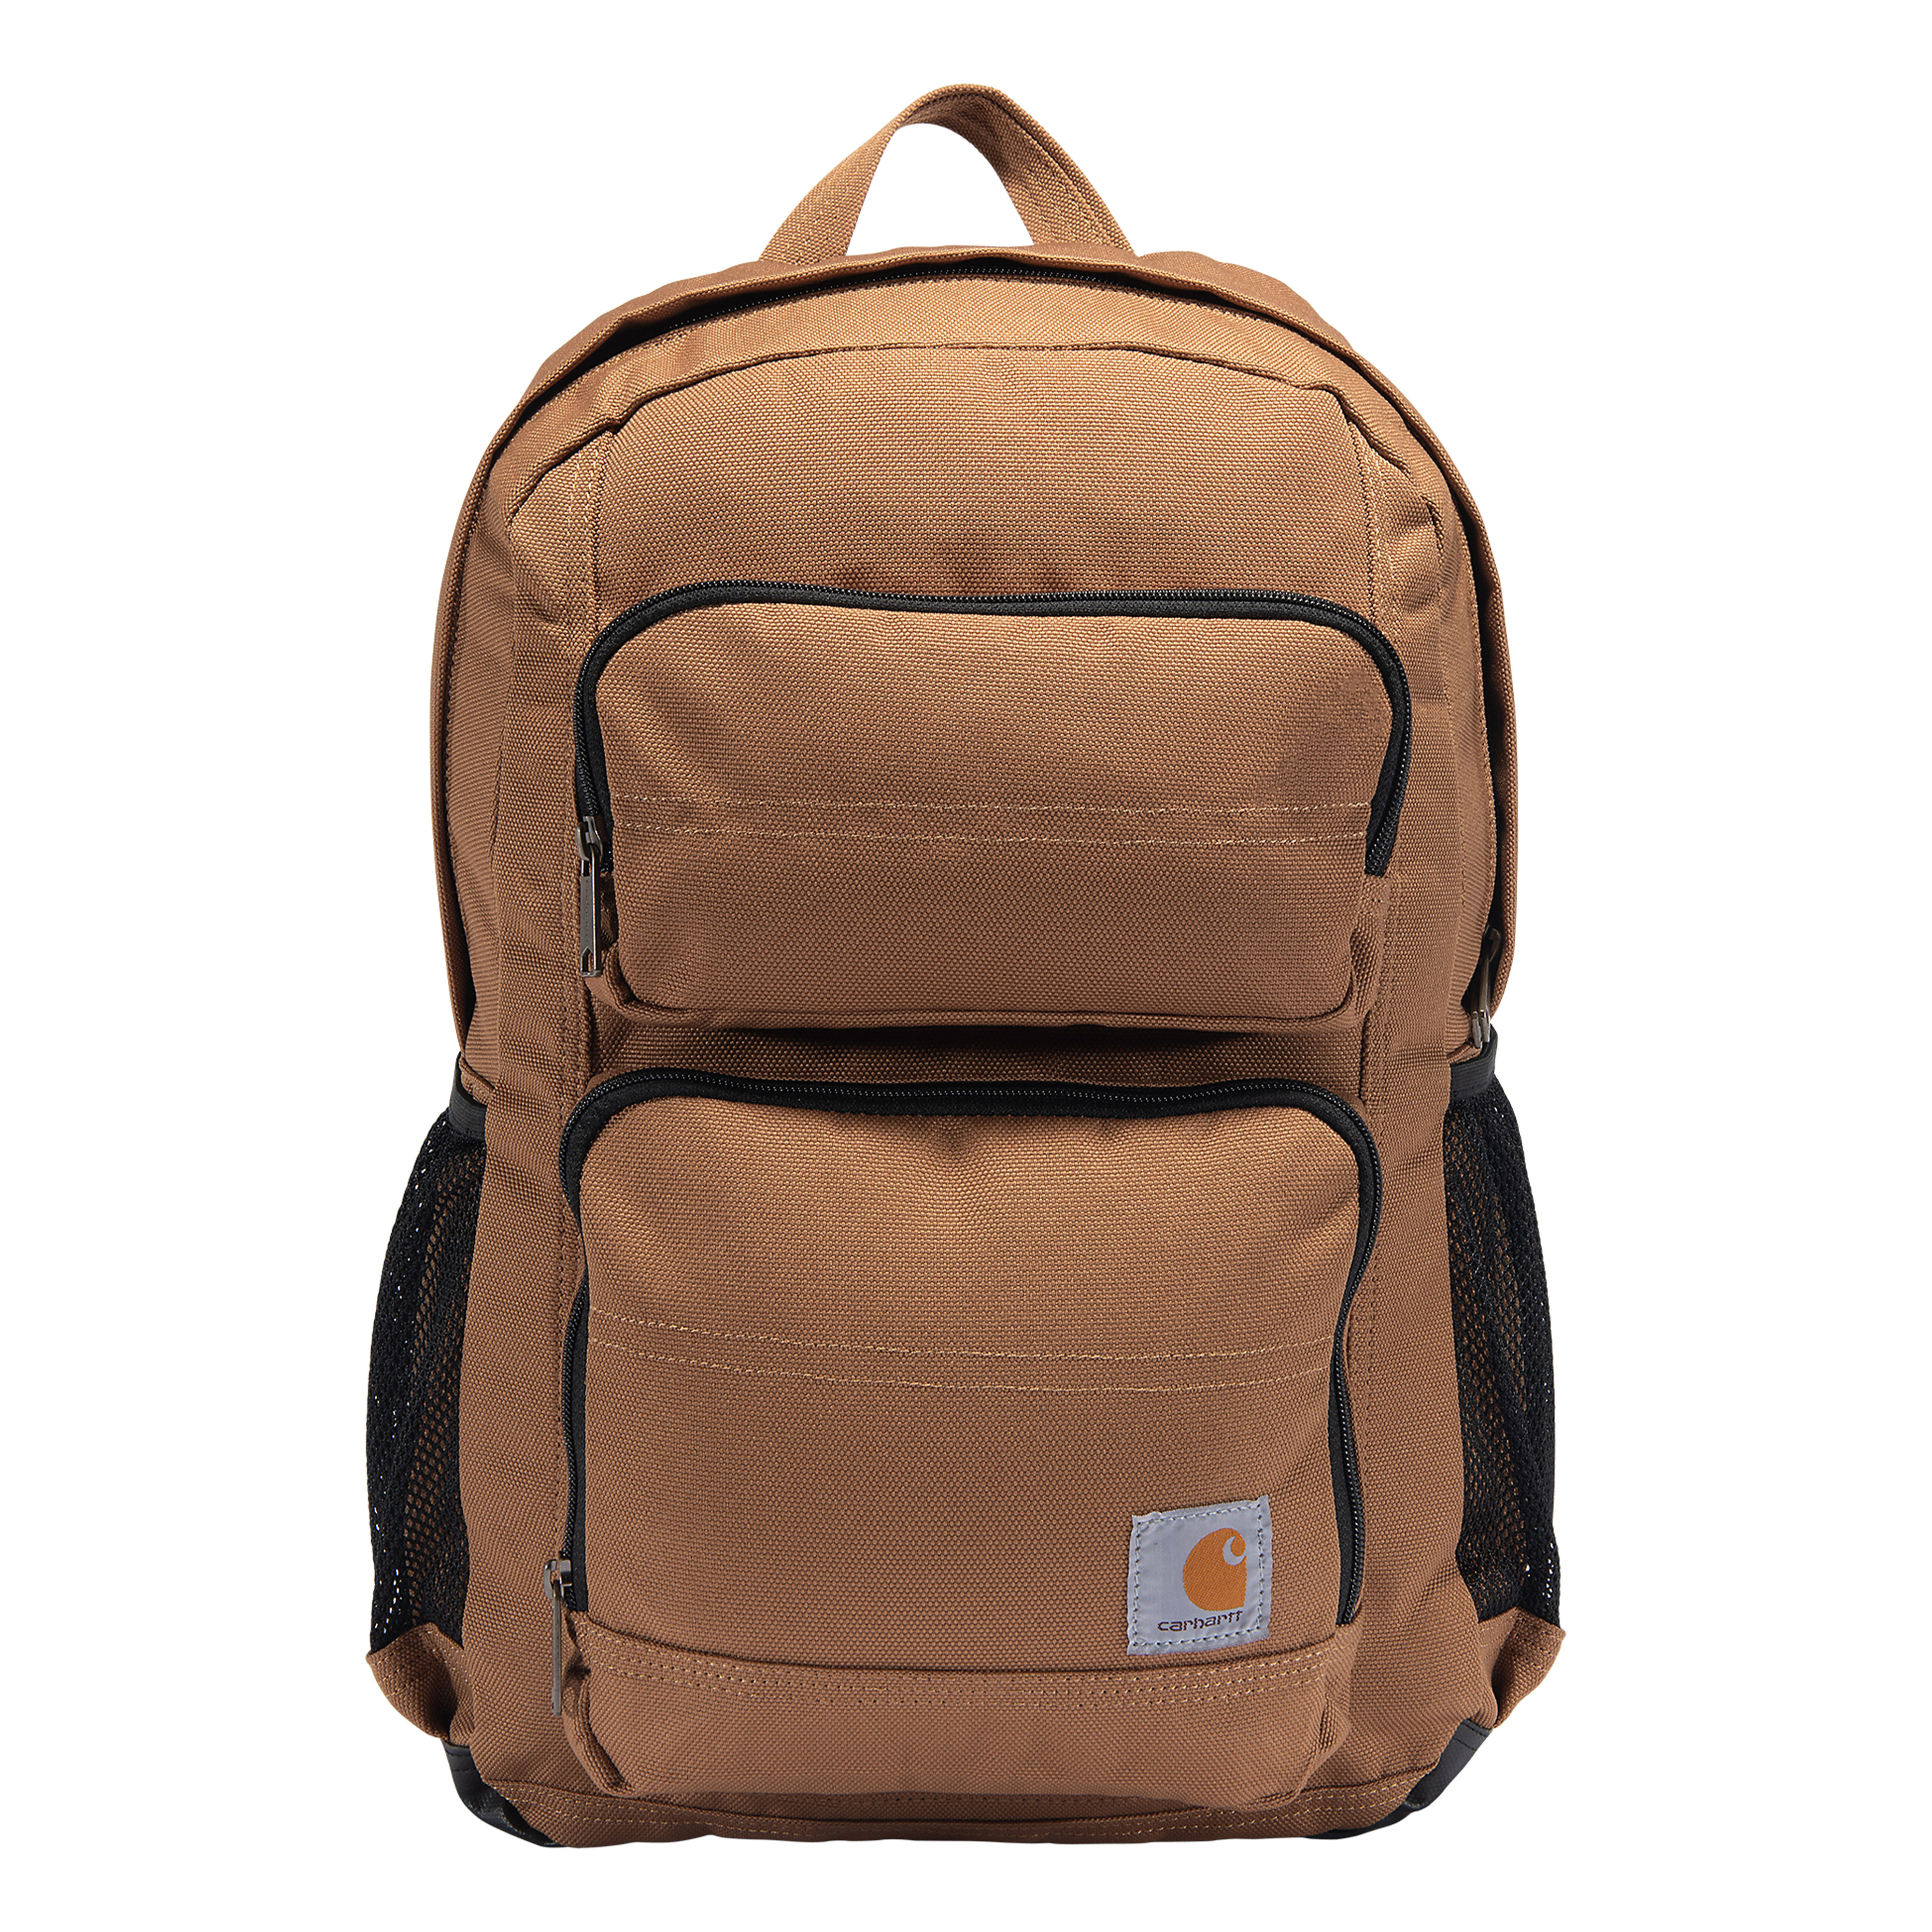 Carhartt Single Compartment Backpack Carhartt Brown 27L